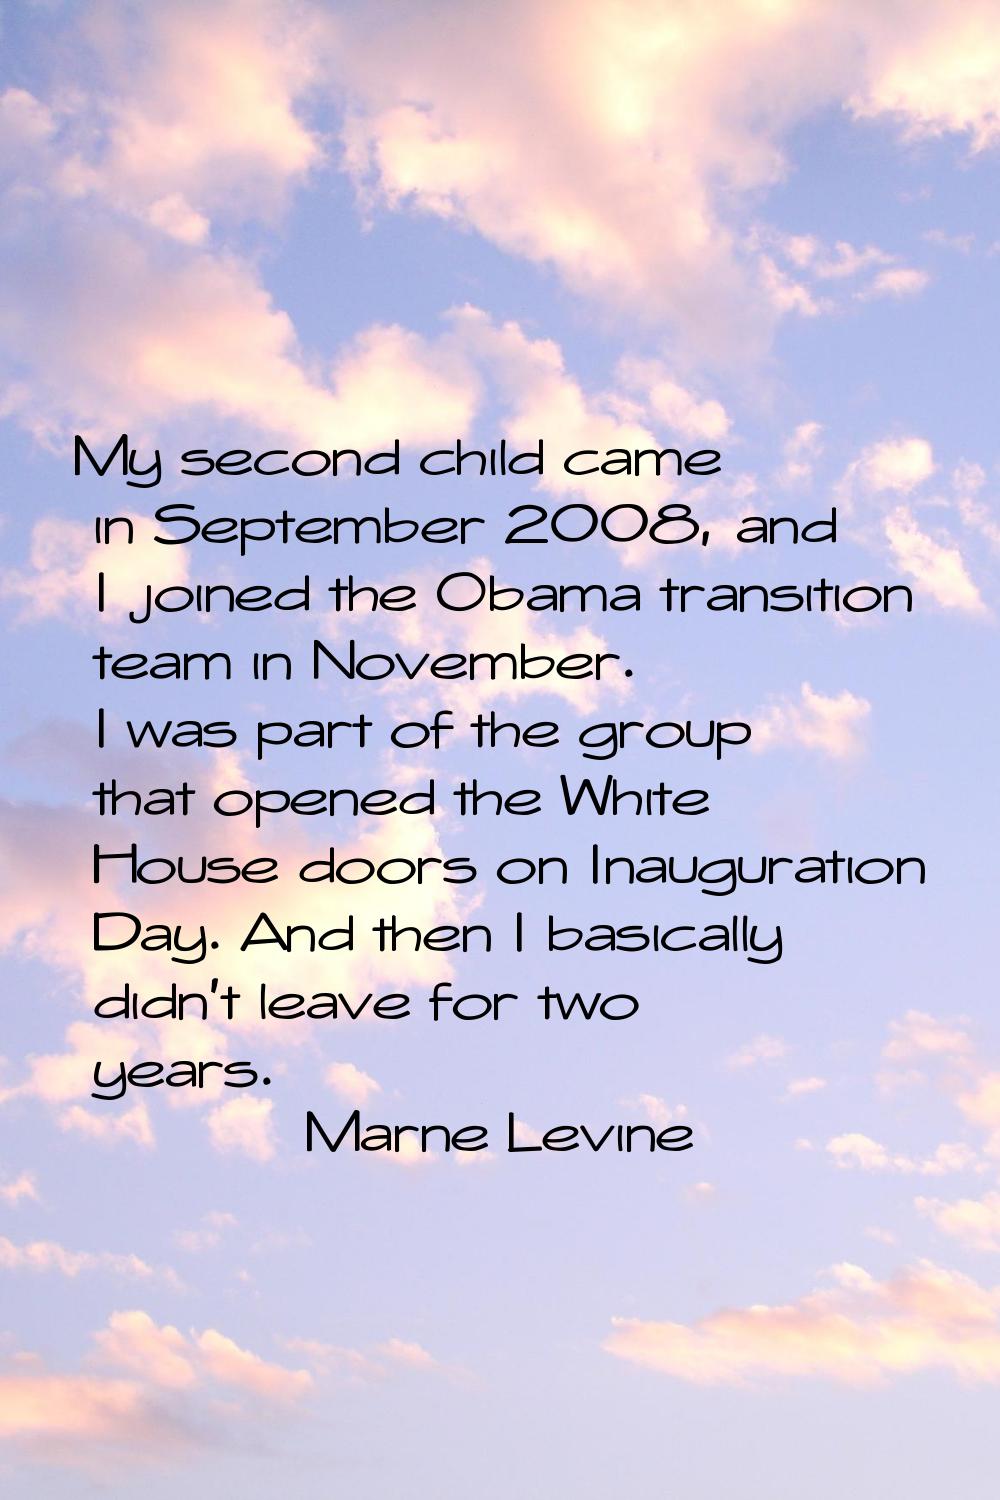 My second child came in September 2008, and I joined the Obama transition team in November. I was p